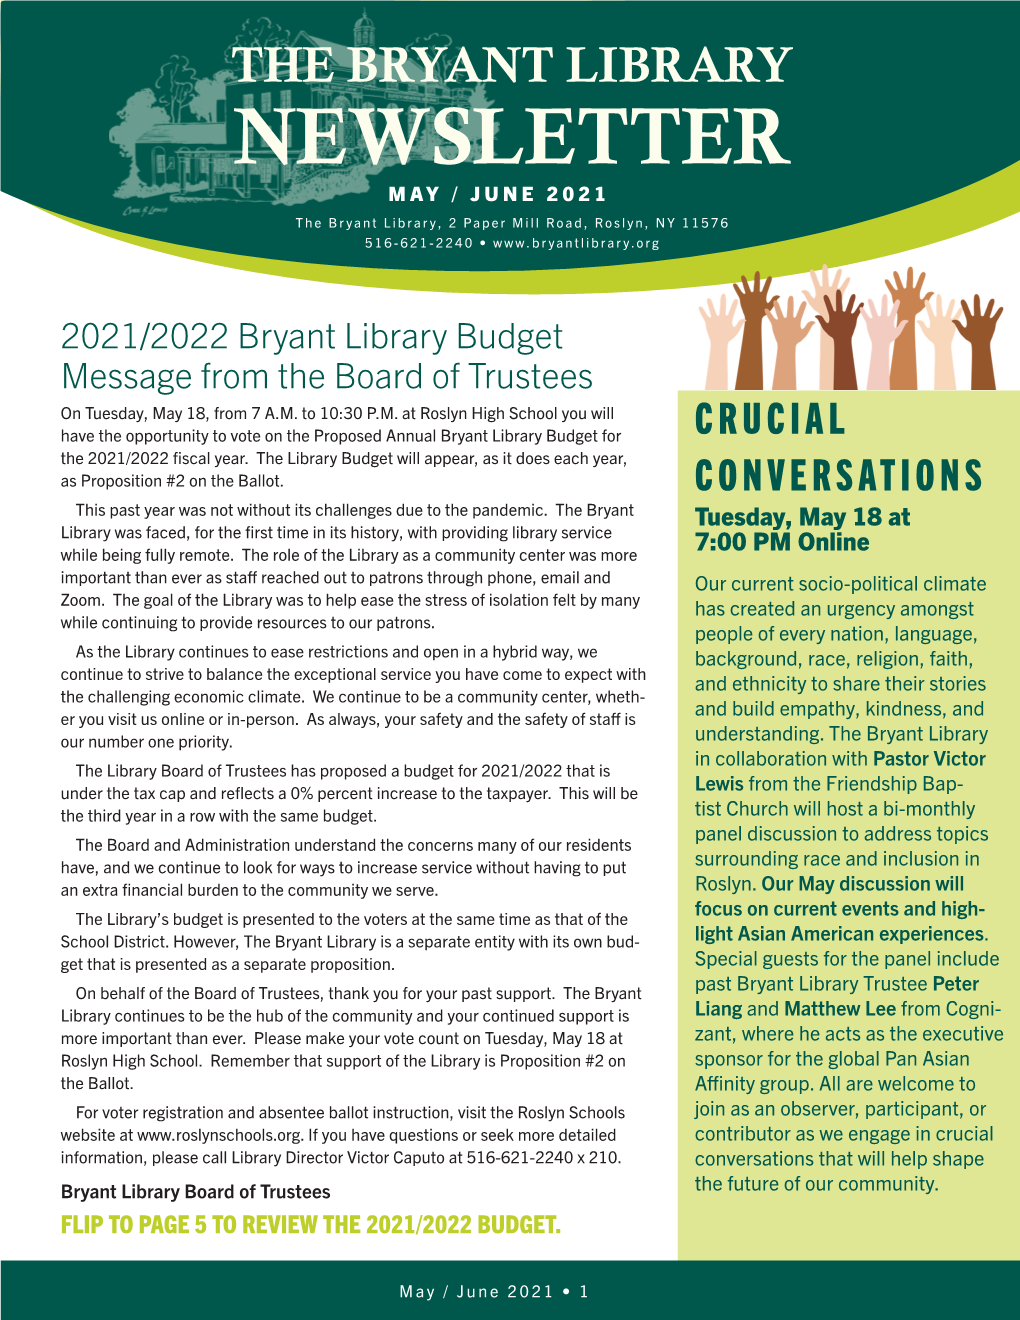 2021/2022 Bryant Library Budget Message from the Board of Trustees on Tuesday, May 18, from 7 A.M